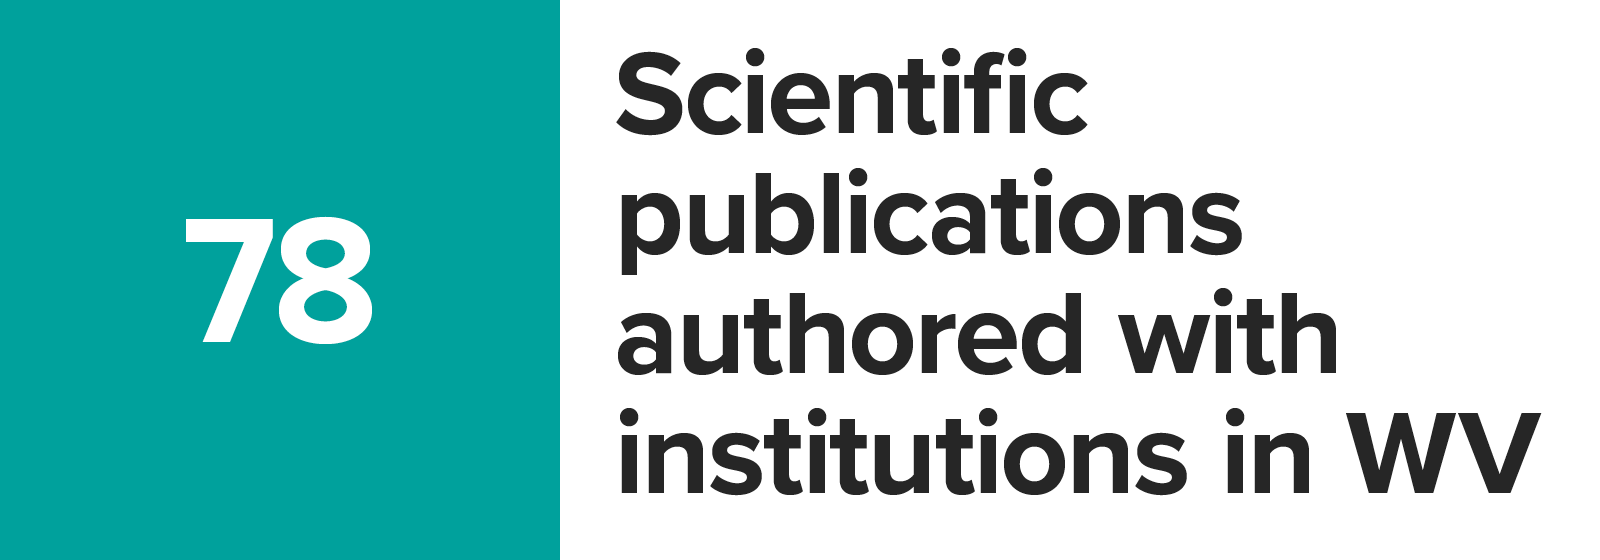 Number graphic scientific publications authored with institutions in West Virginia